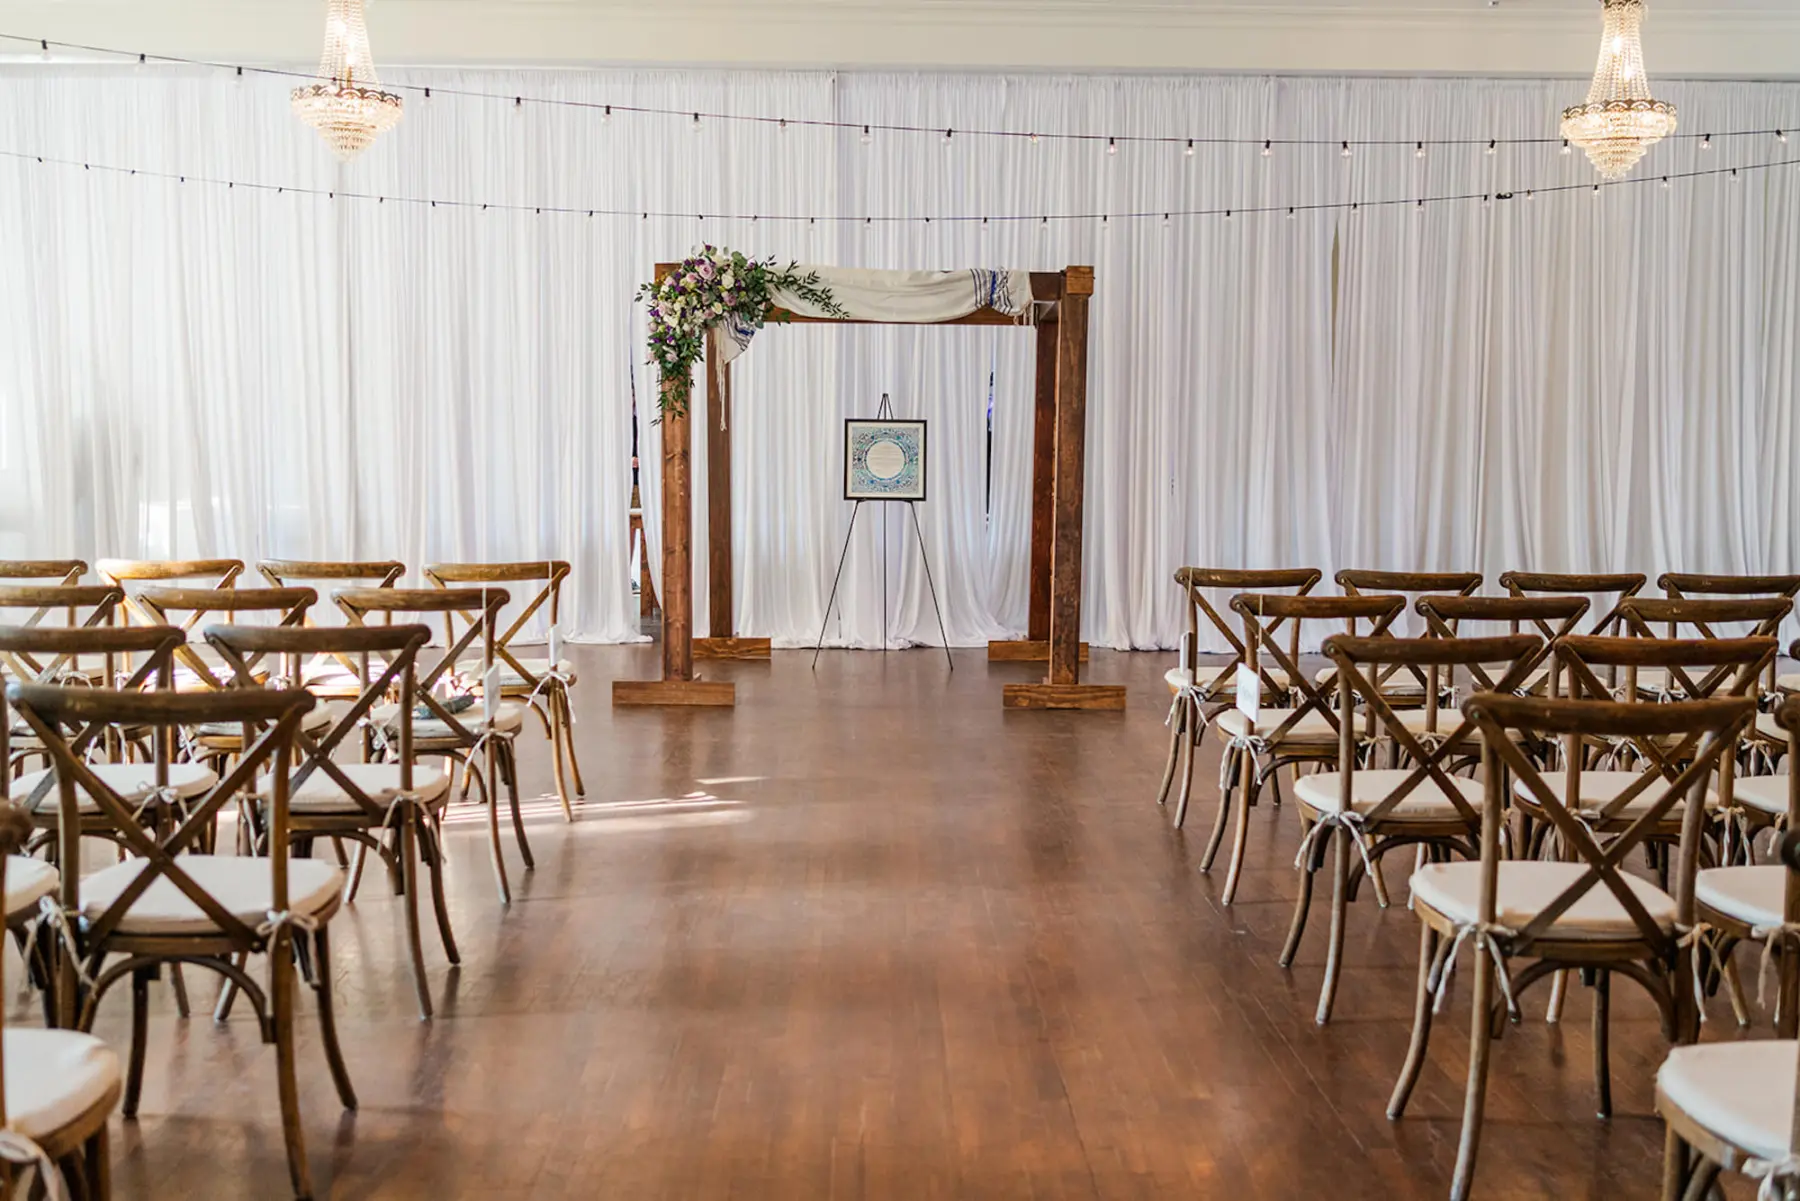 Elegant Wooden Wedding Jewish Ceremony Chuppah Arch with Purple Spring Floral Inspiration with White Drapping and Crossaback Chairs | Tampa Venue The Orlo